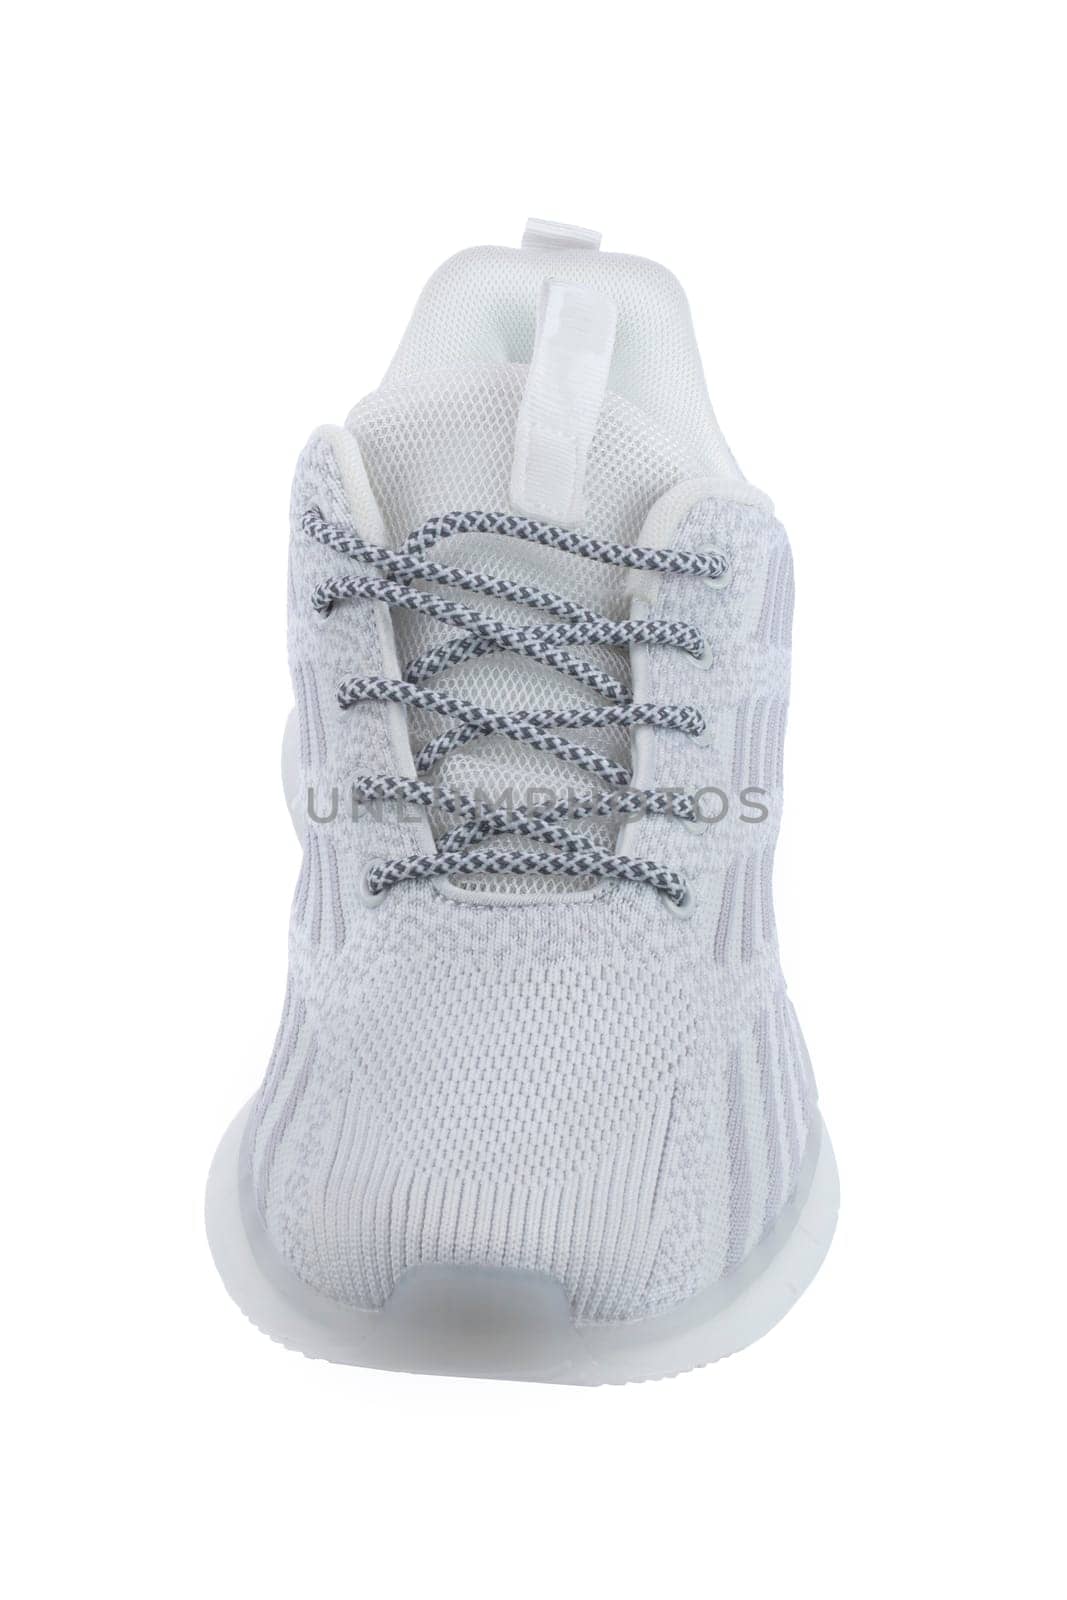 Sneaker one made of white fabric with lacing on a white background.